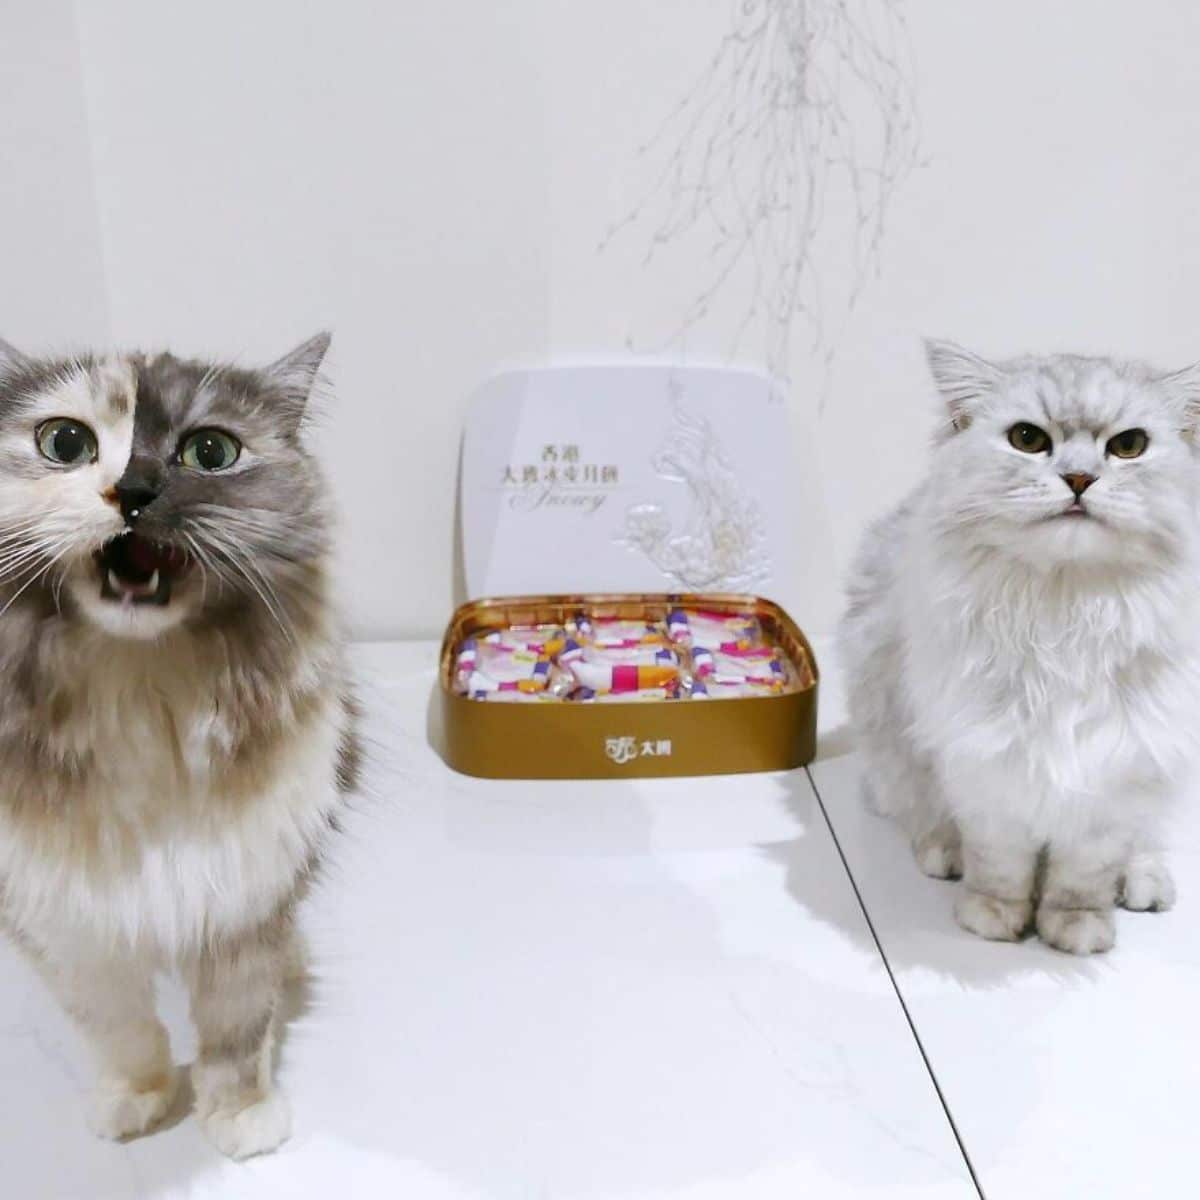 fluffy cat with right side of face being grey and left side being black and whtie and grey fluffy cat with a box of sweets between them